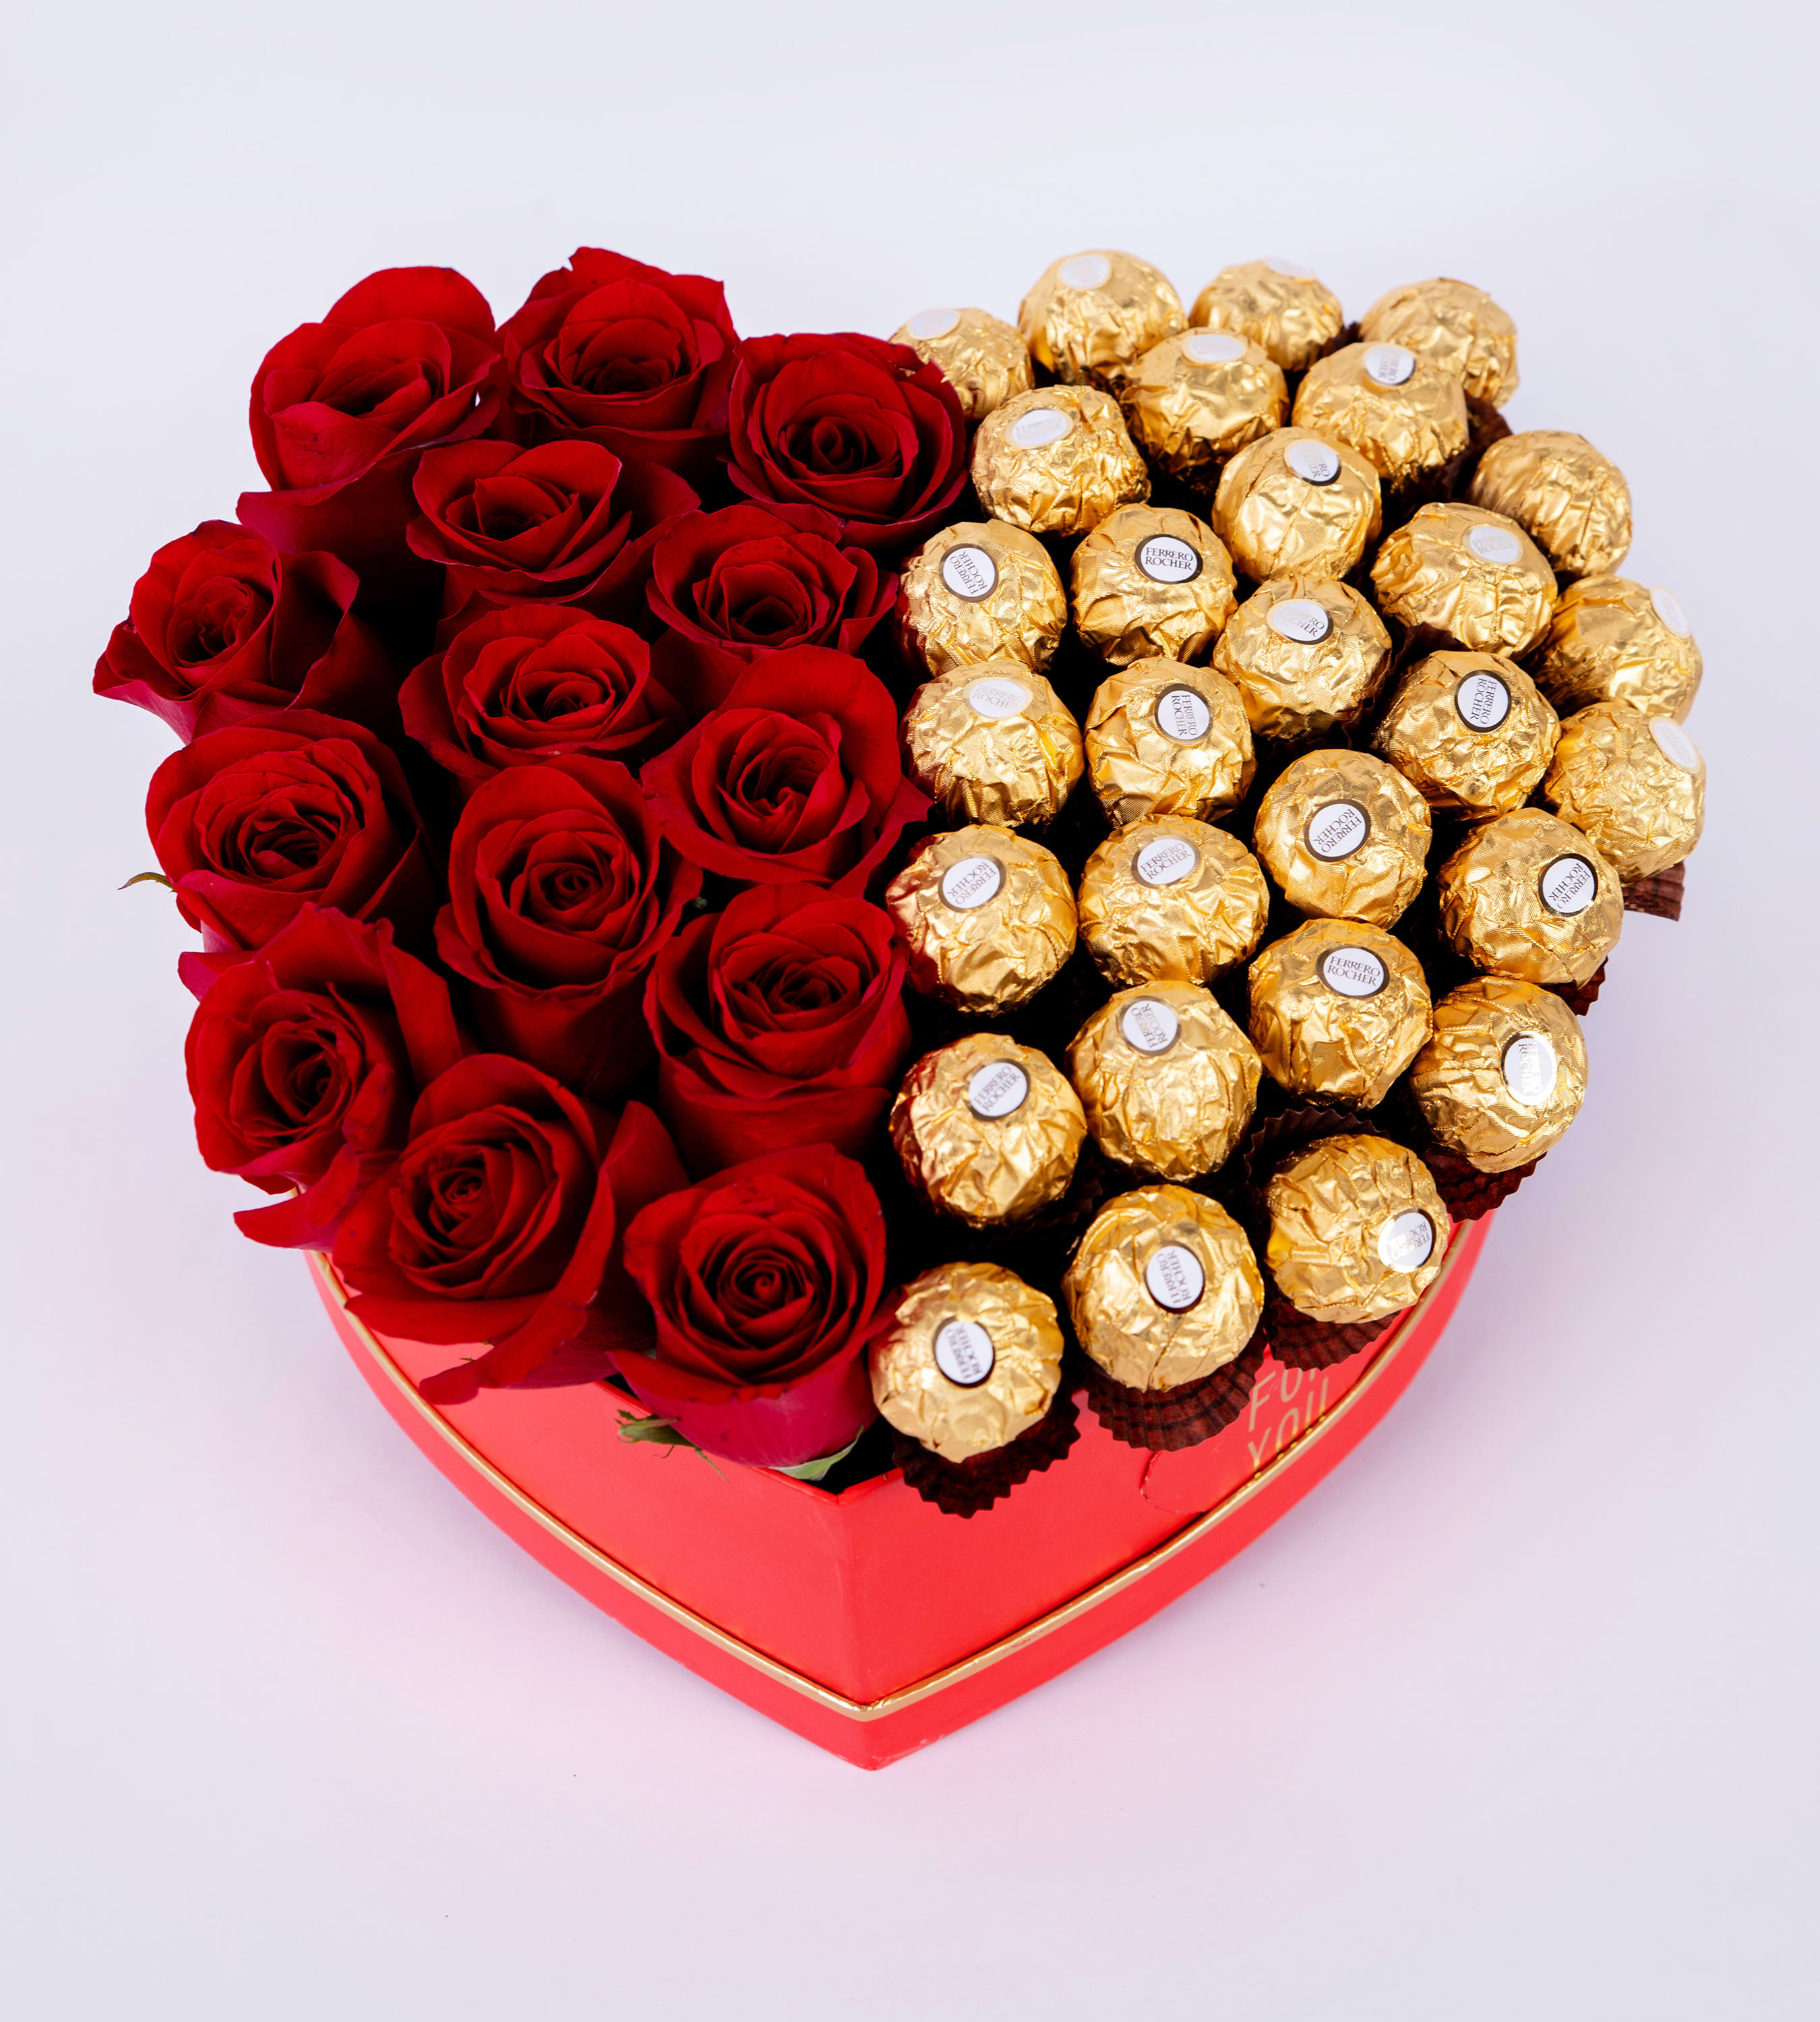 Box of red roses and chocolates - Box of red roses and chocolates